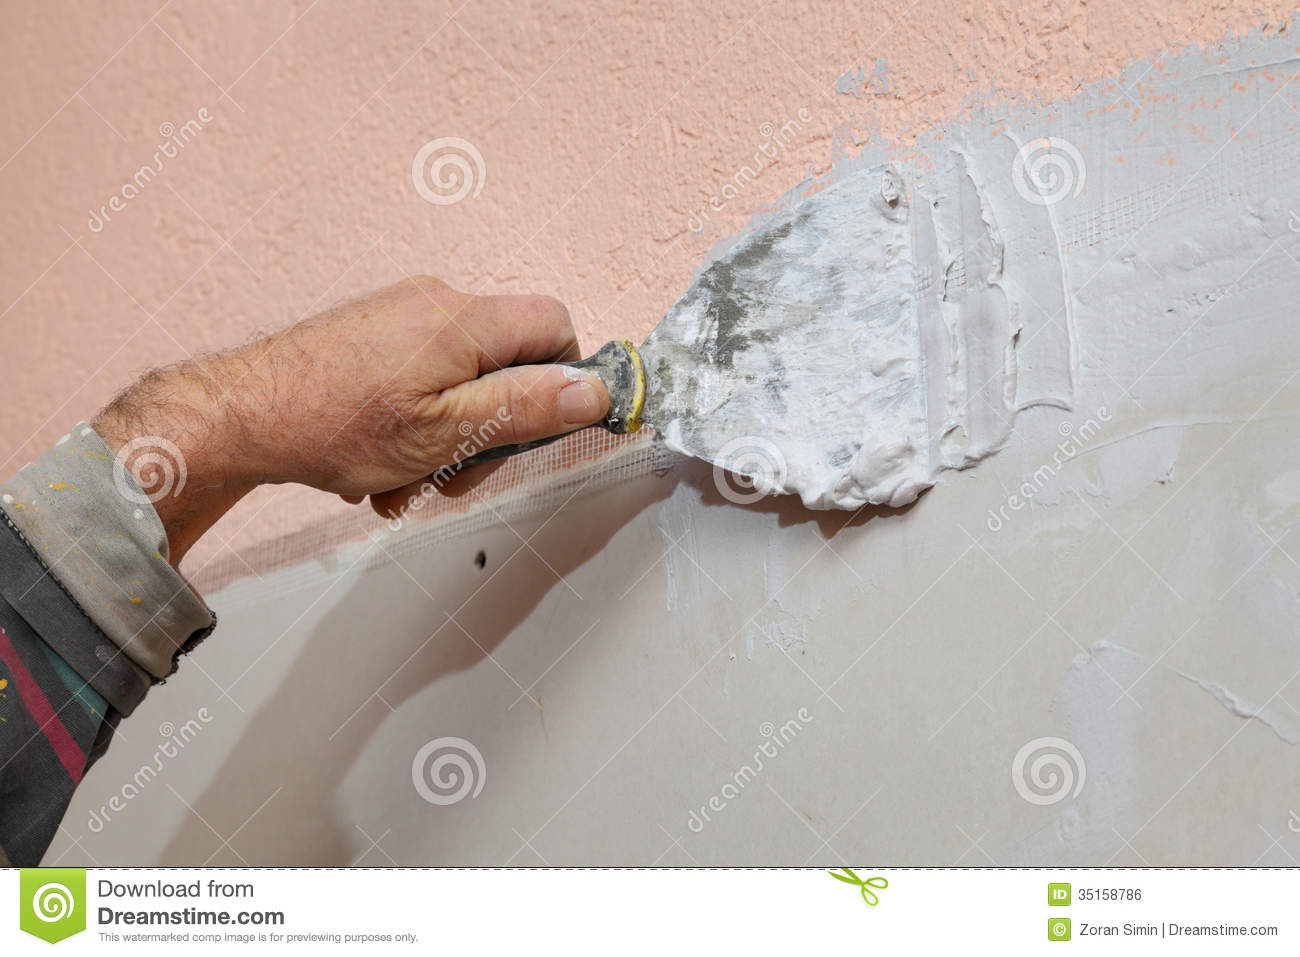 Worker Spreading Plaster With Trowel To Gypsum Board And Fiber Mesh